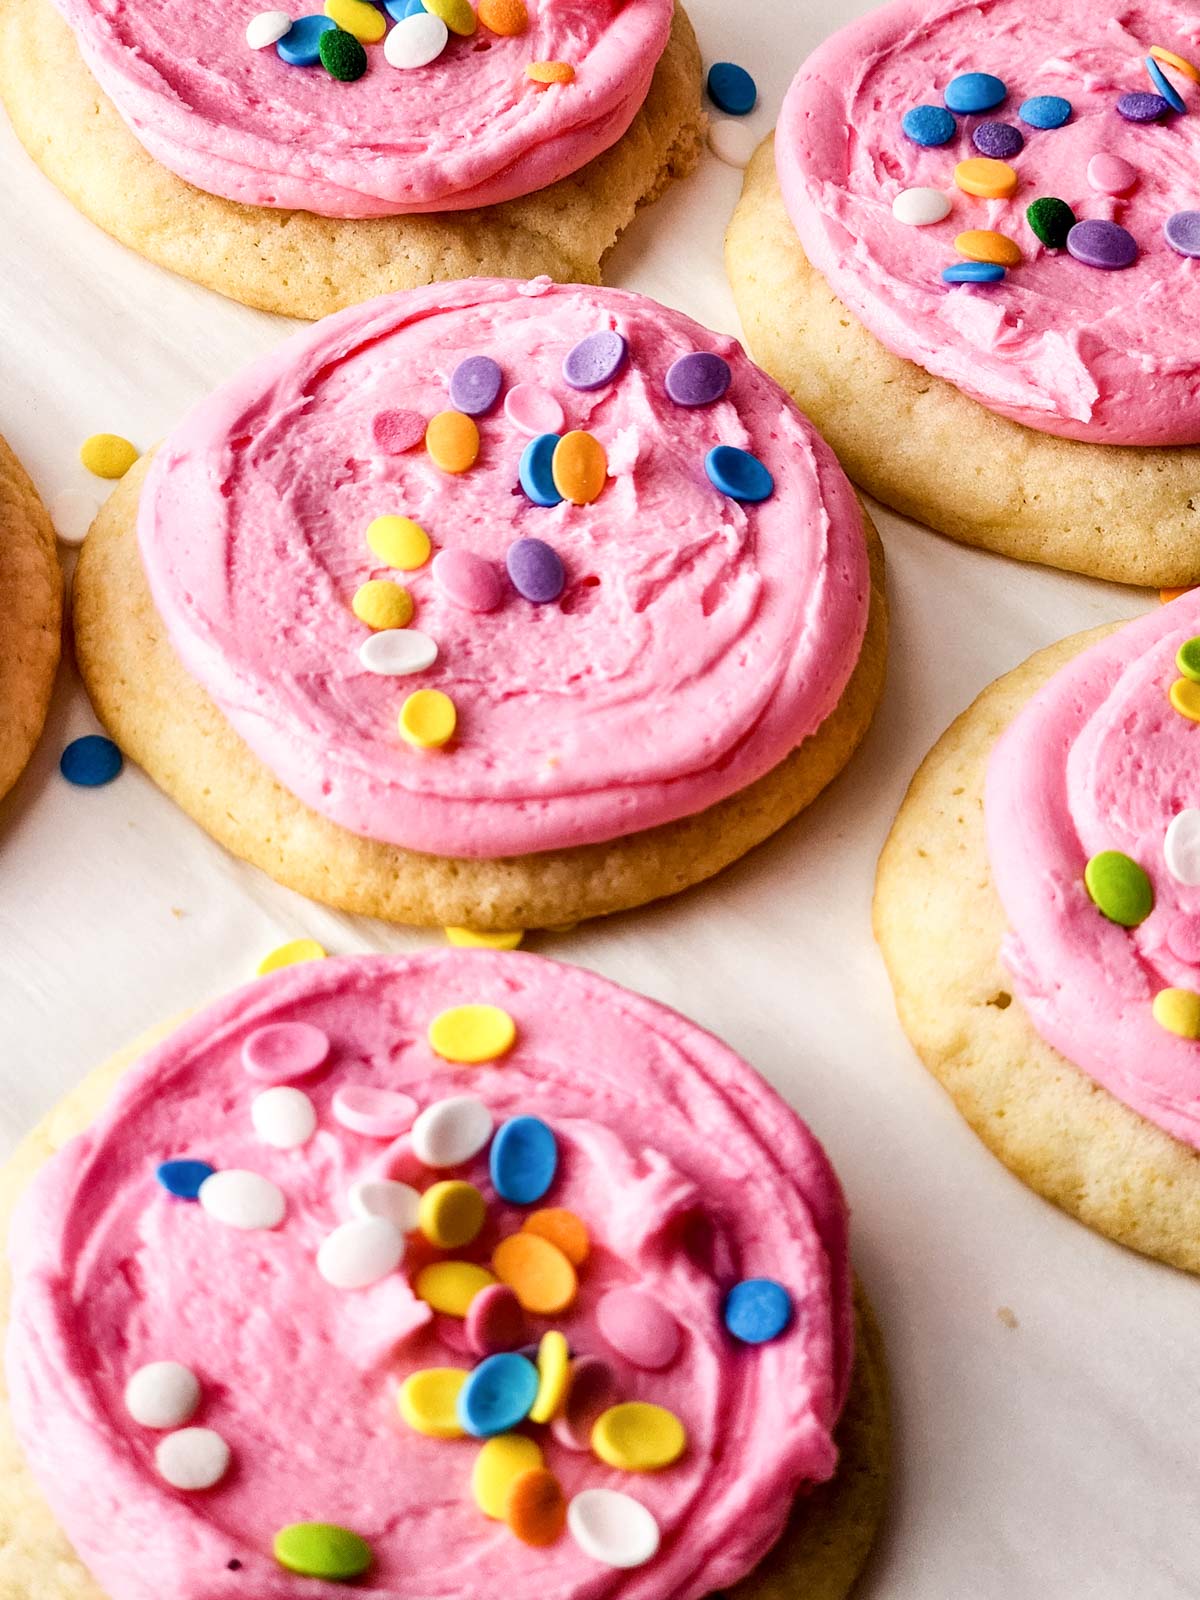 Cookies with pink frosting and sprinkles on a baking tray.